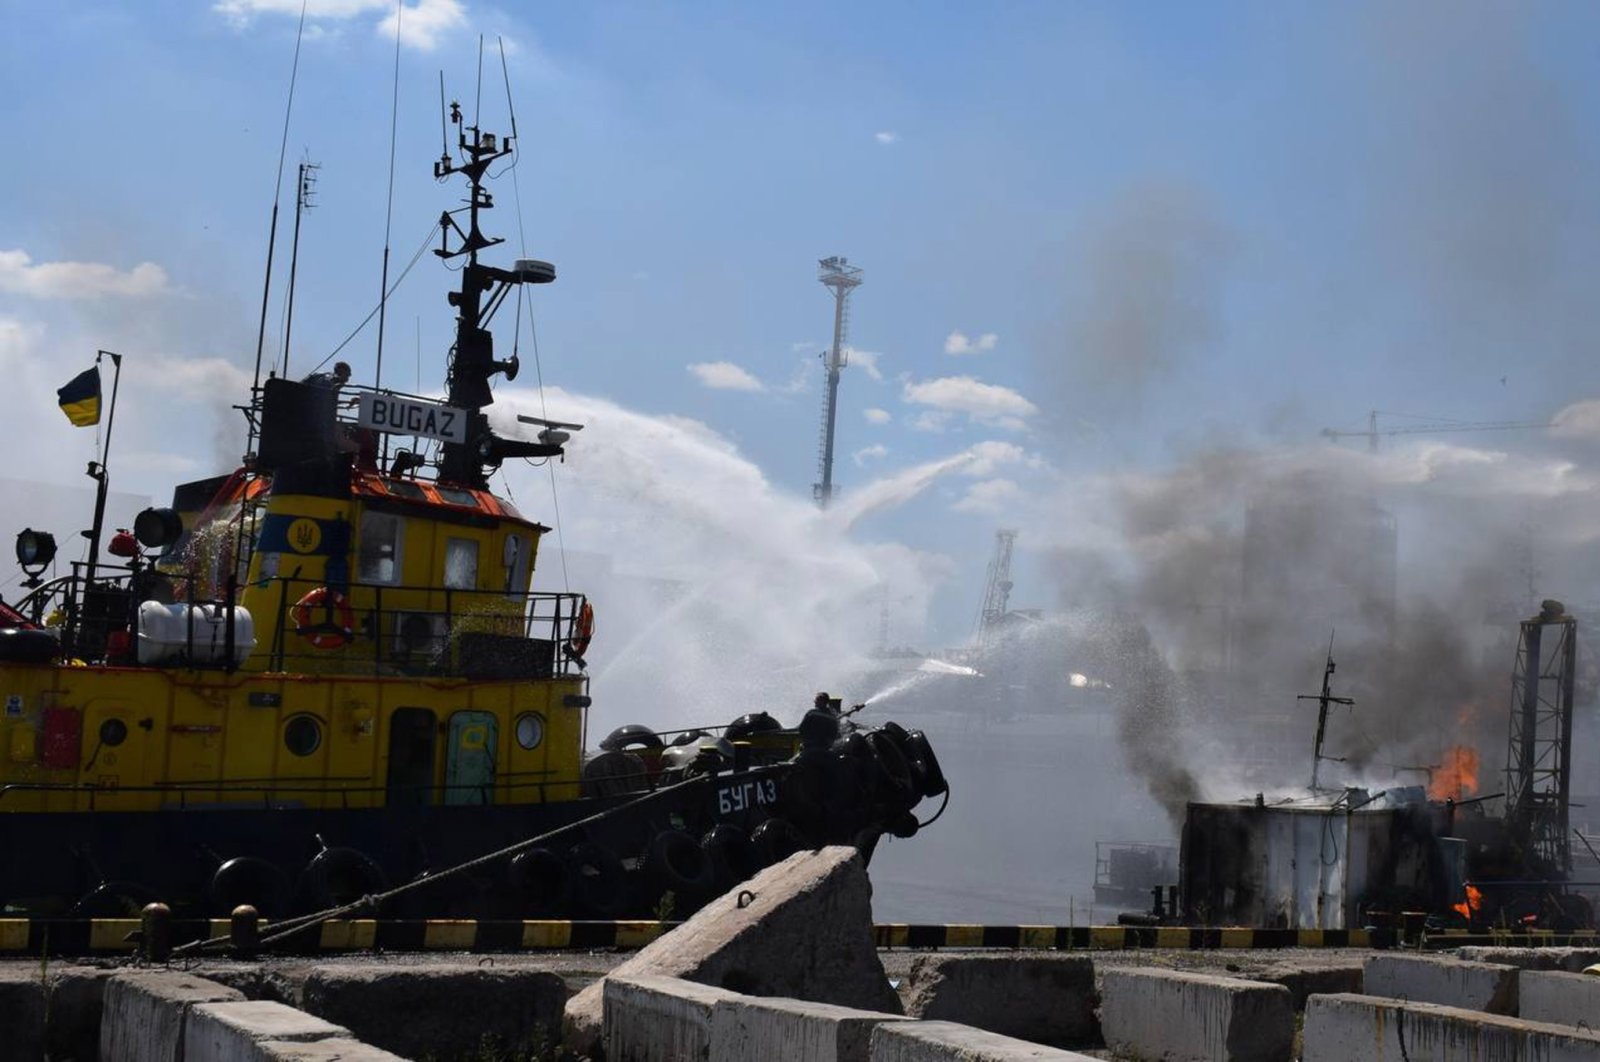 Firefighters working to put out a fire in a sea port of Odessa, southern Ukraine, July 23, 2022. (Odesa City Hall Press Office via EPA)